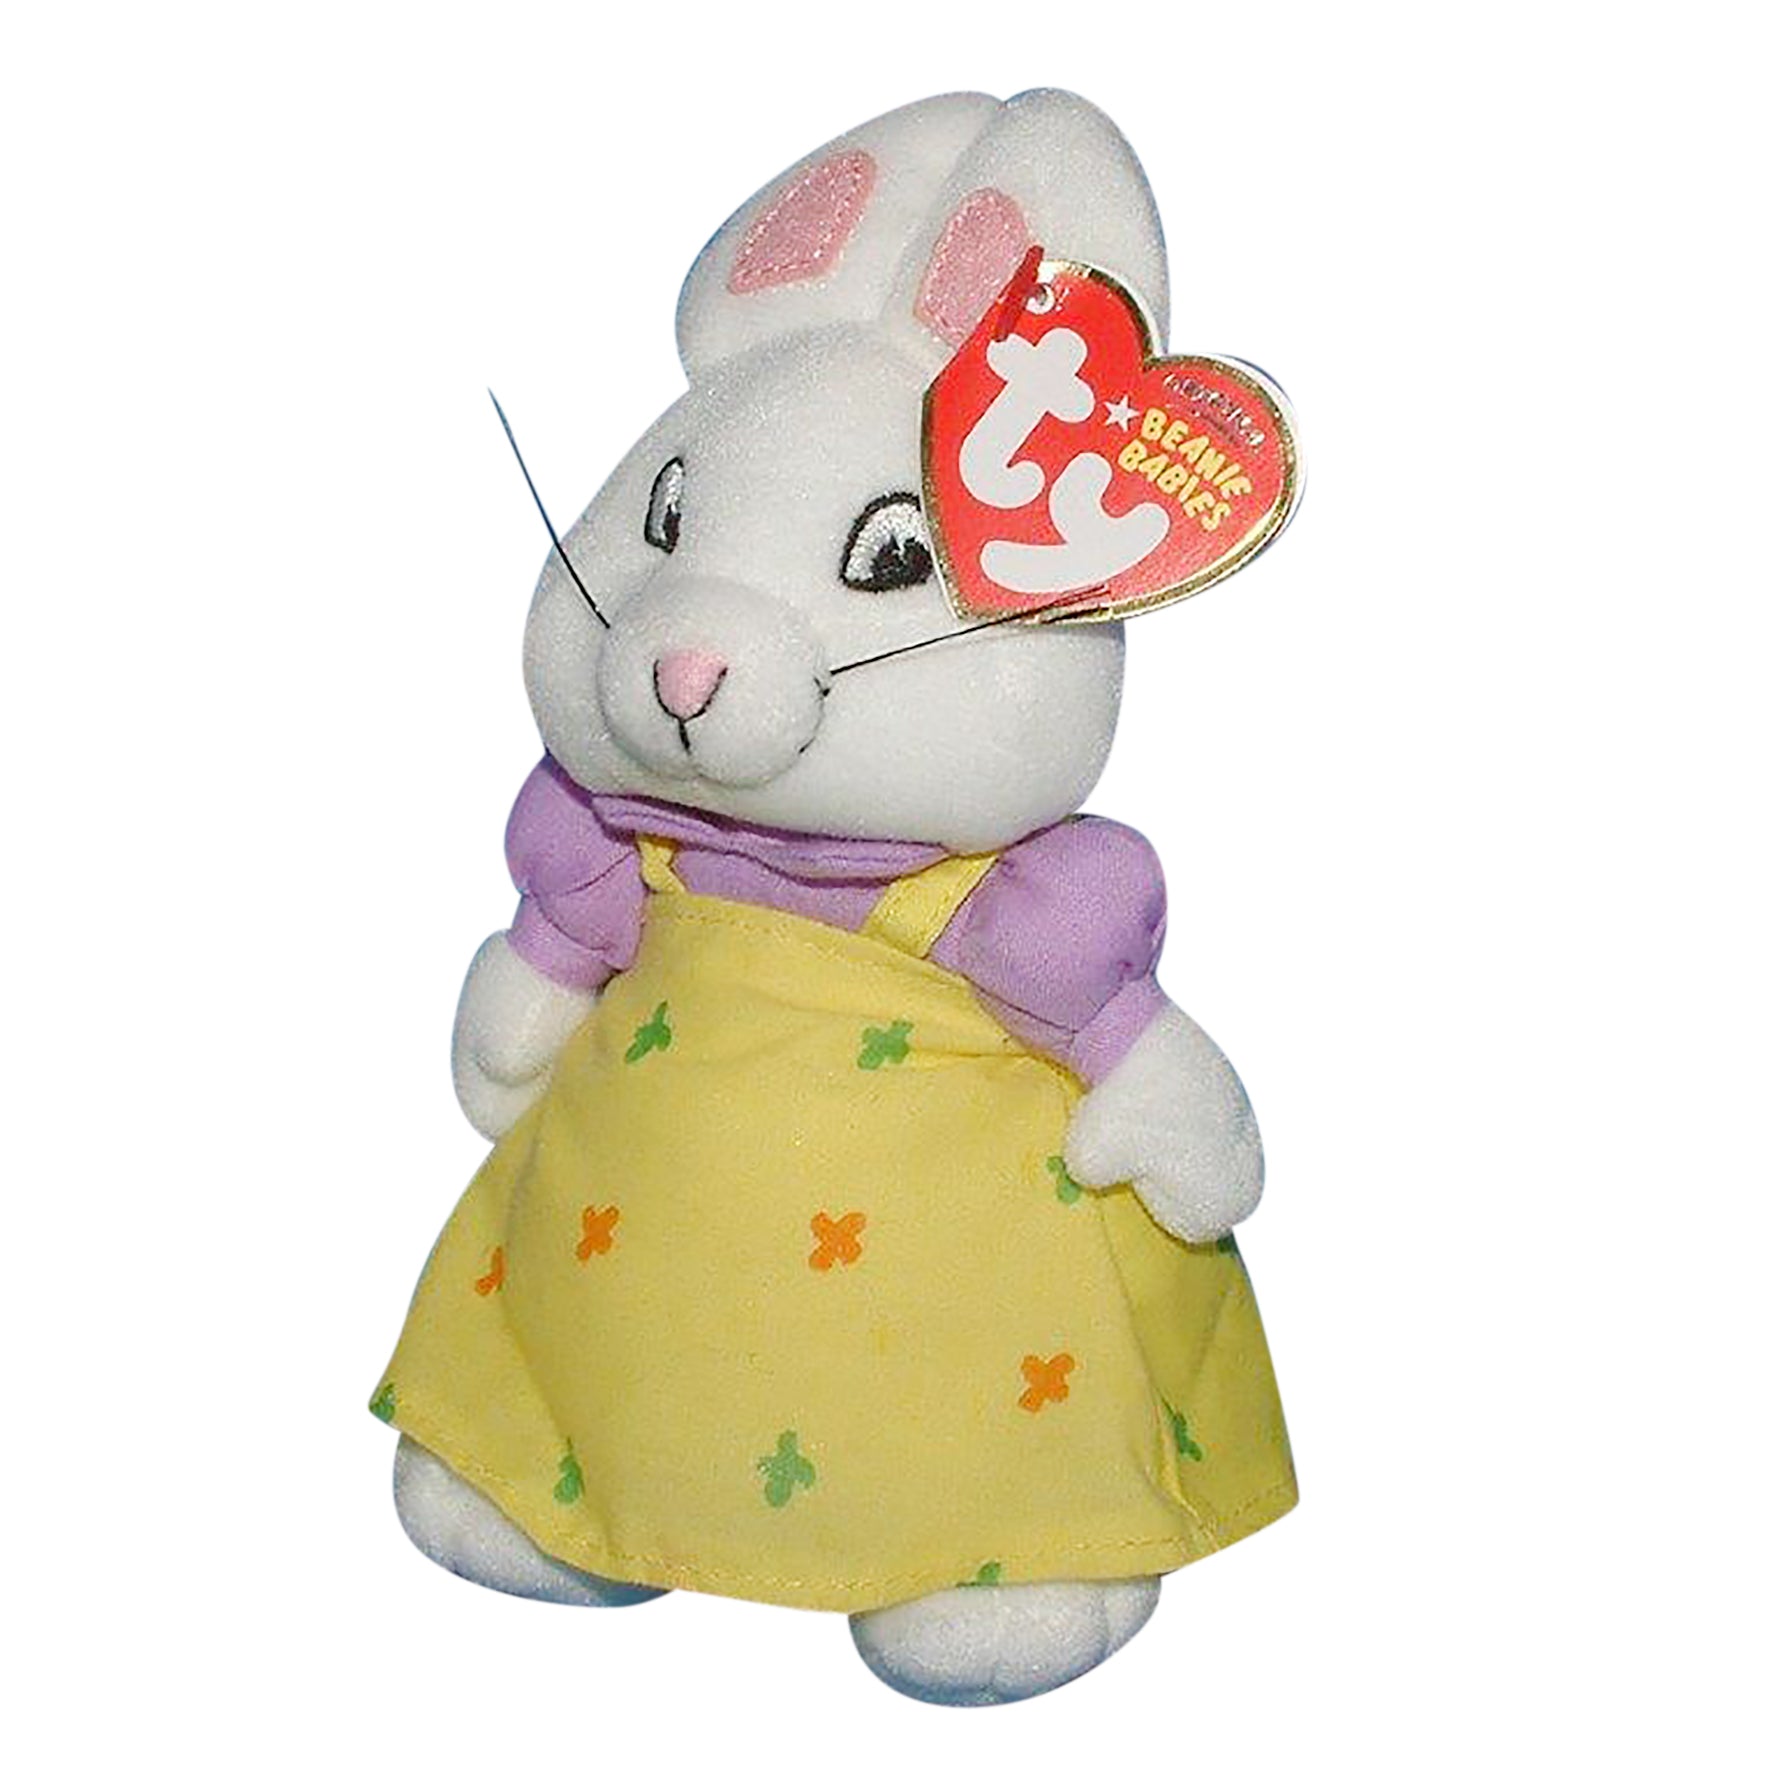 Ty Beanie Baby: Ruby the Bunny - Max & Ruby